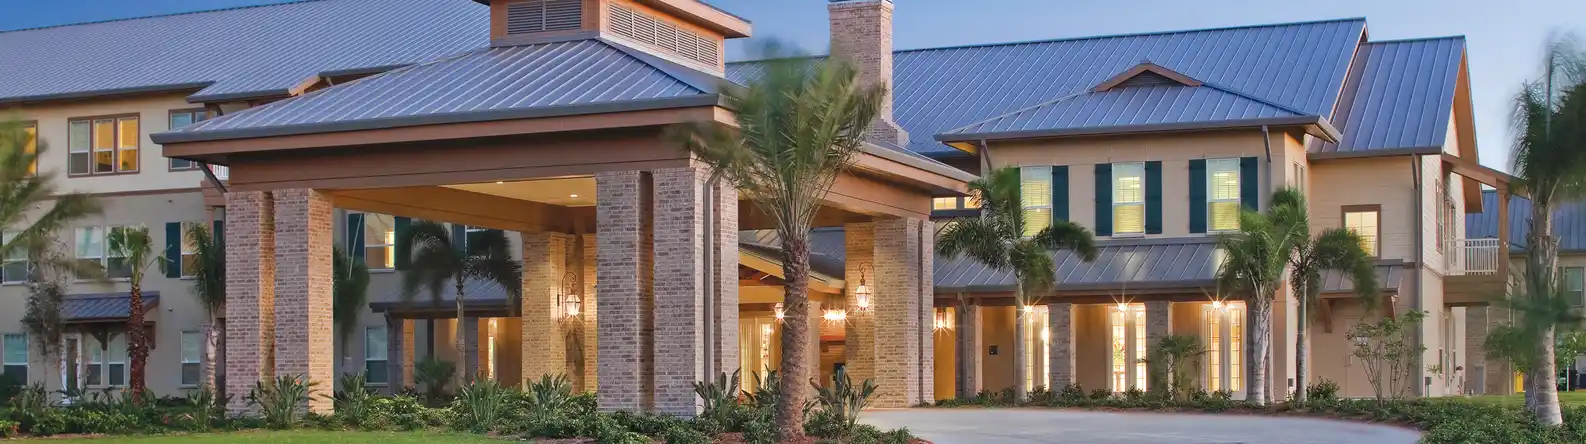 Mirador Retirement Community in Corpus Christi, TX - Overview and further information